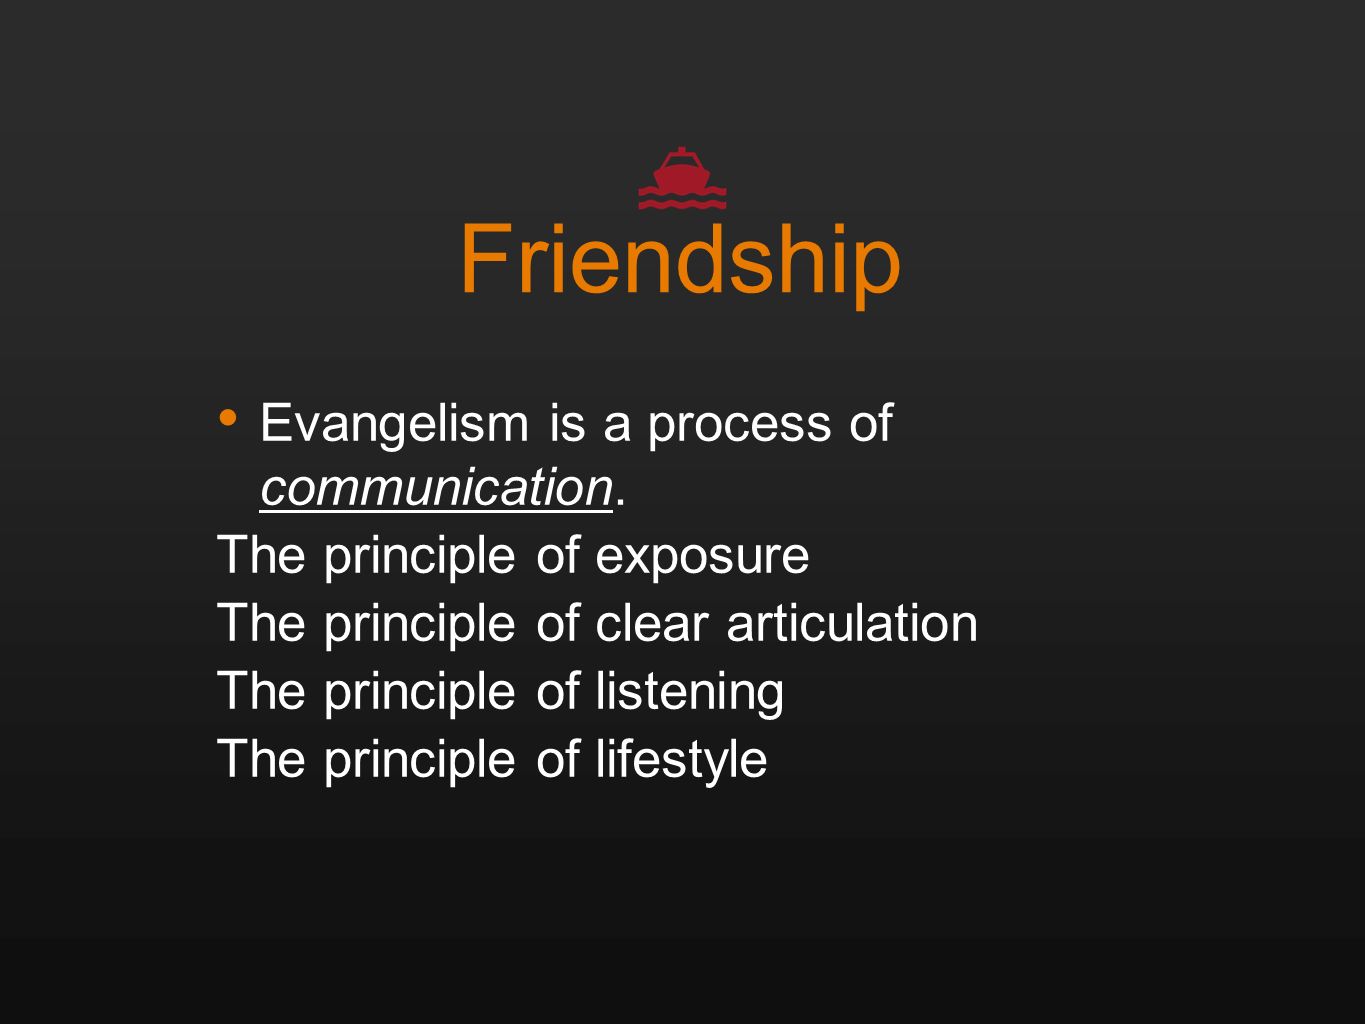 Whats the difference between lifestyle and friendship evangelism?